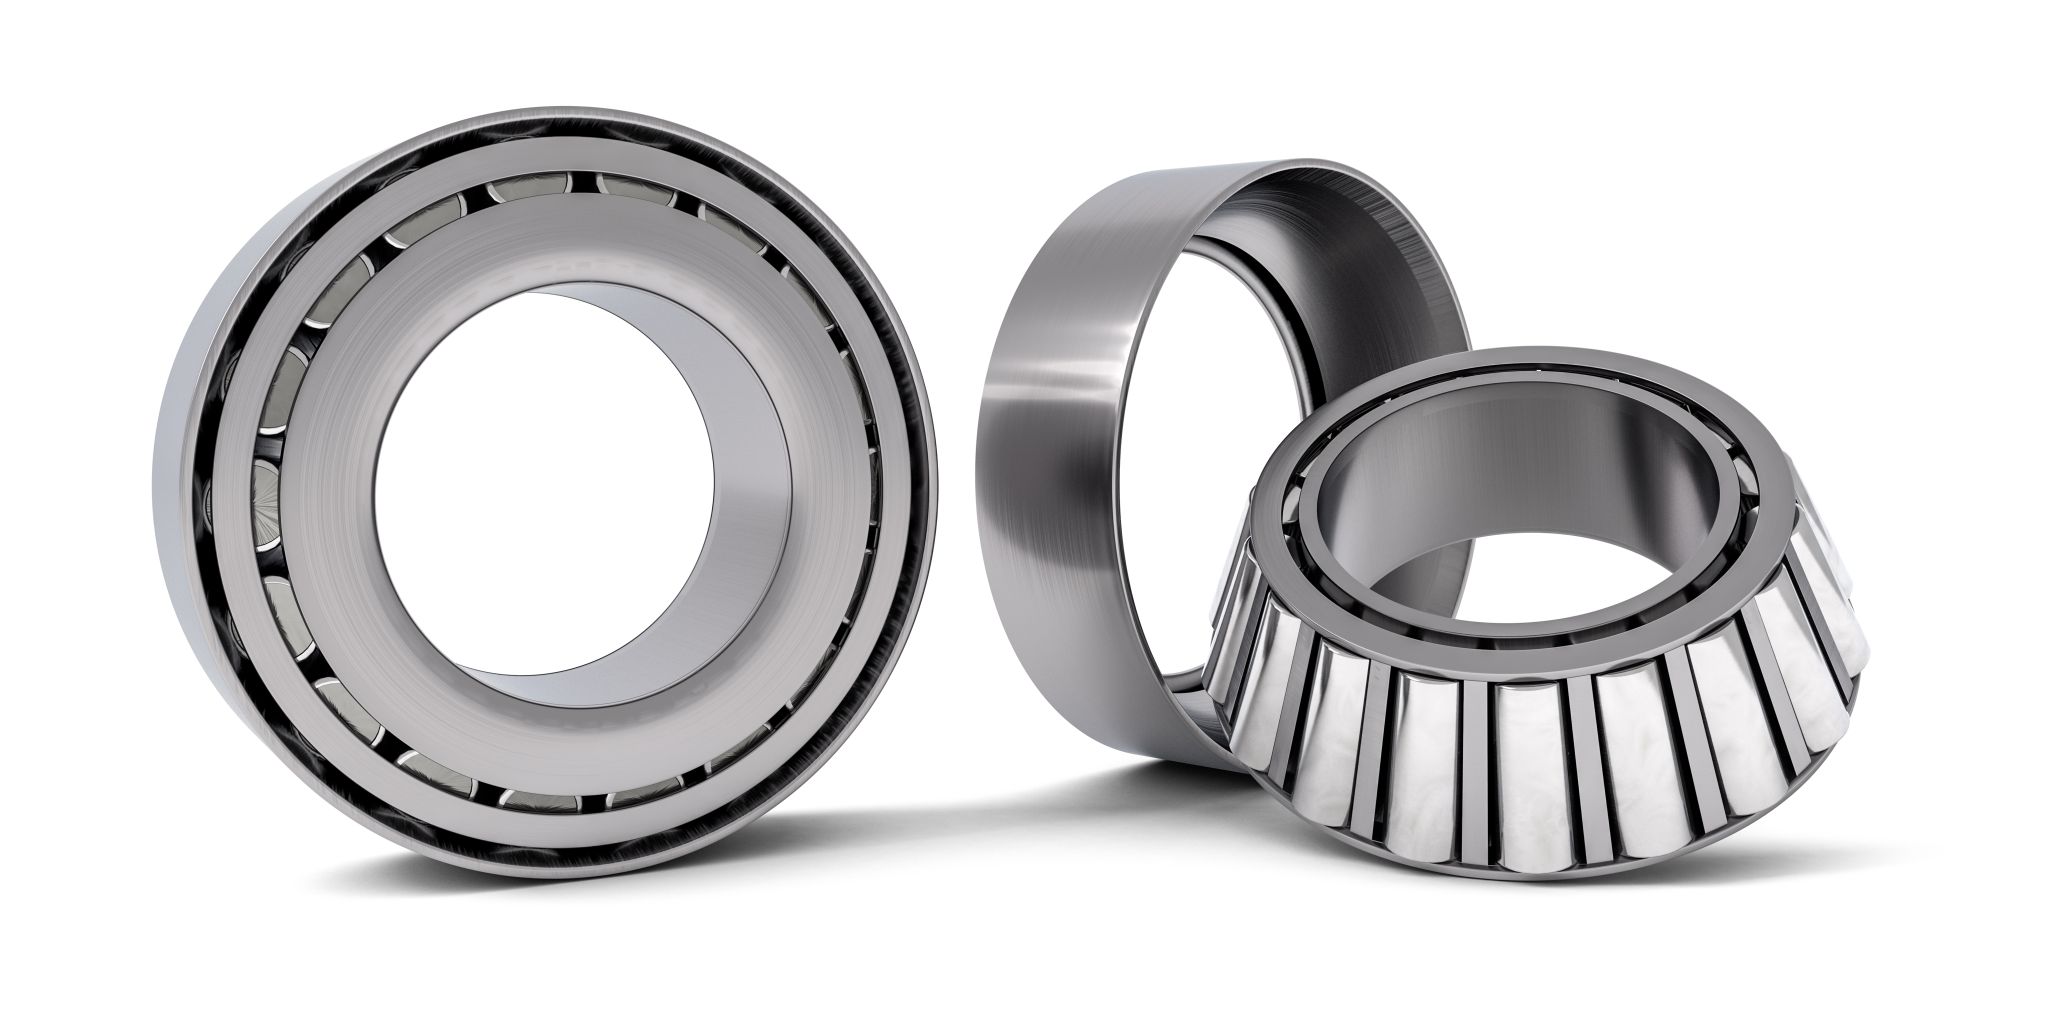 What Are Tapered Roller Bearings?